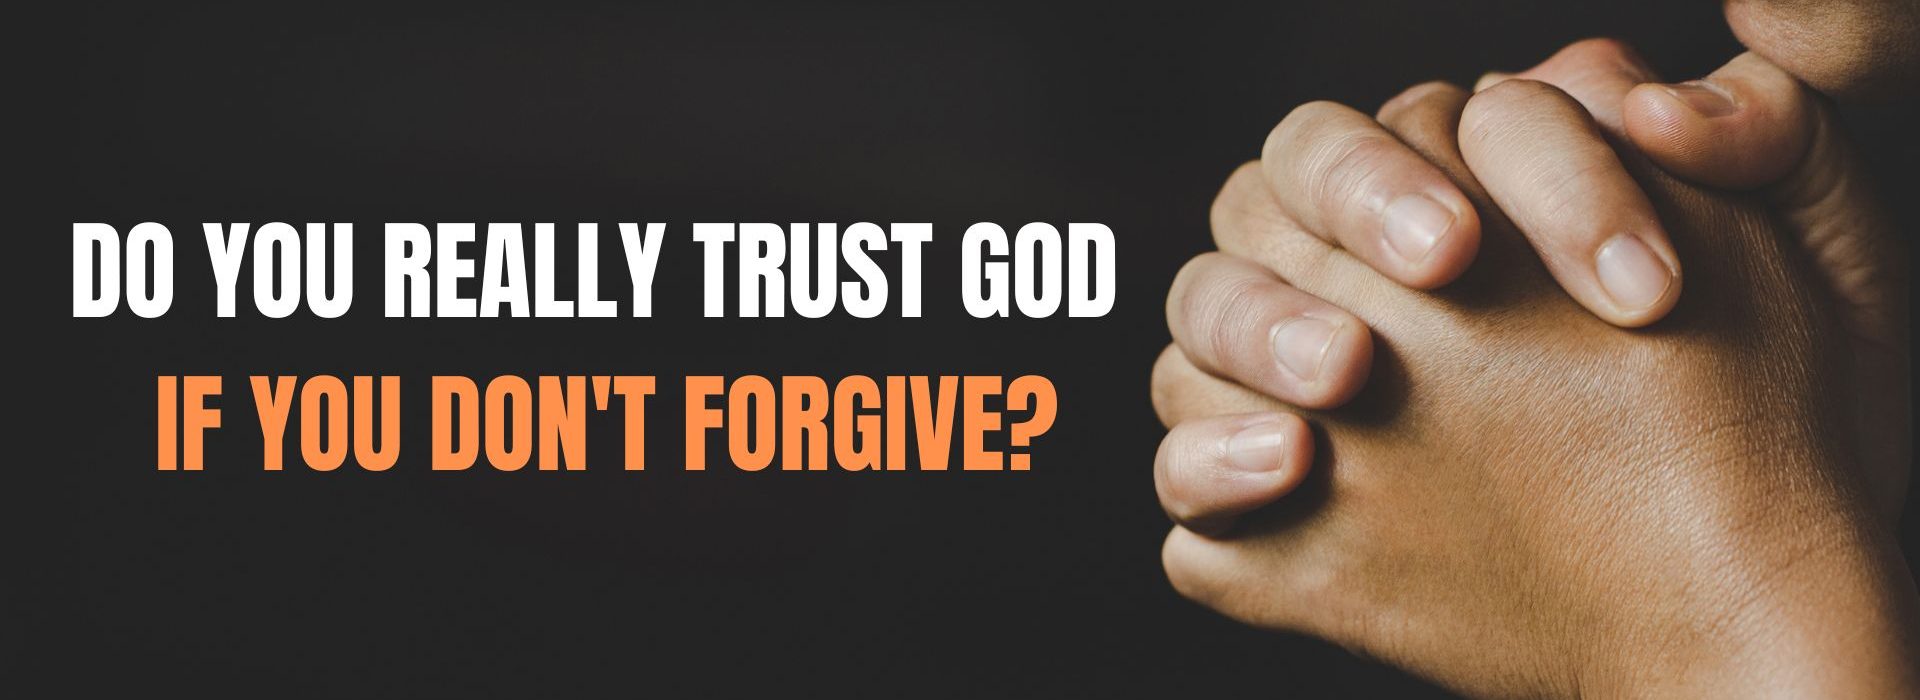 Do You Really Trust God If you don't forgive